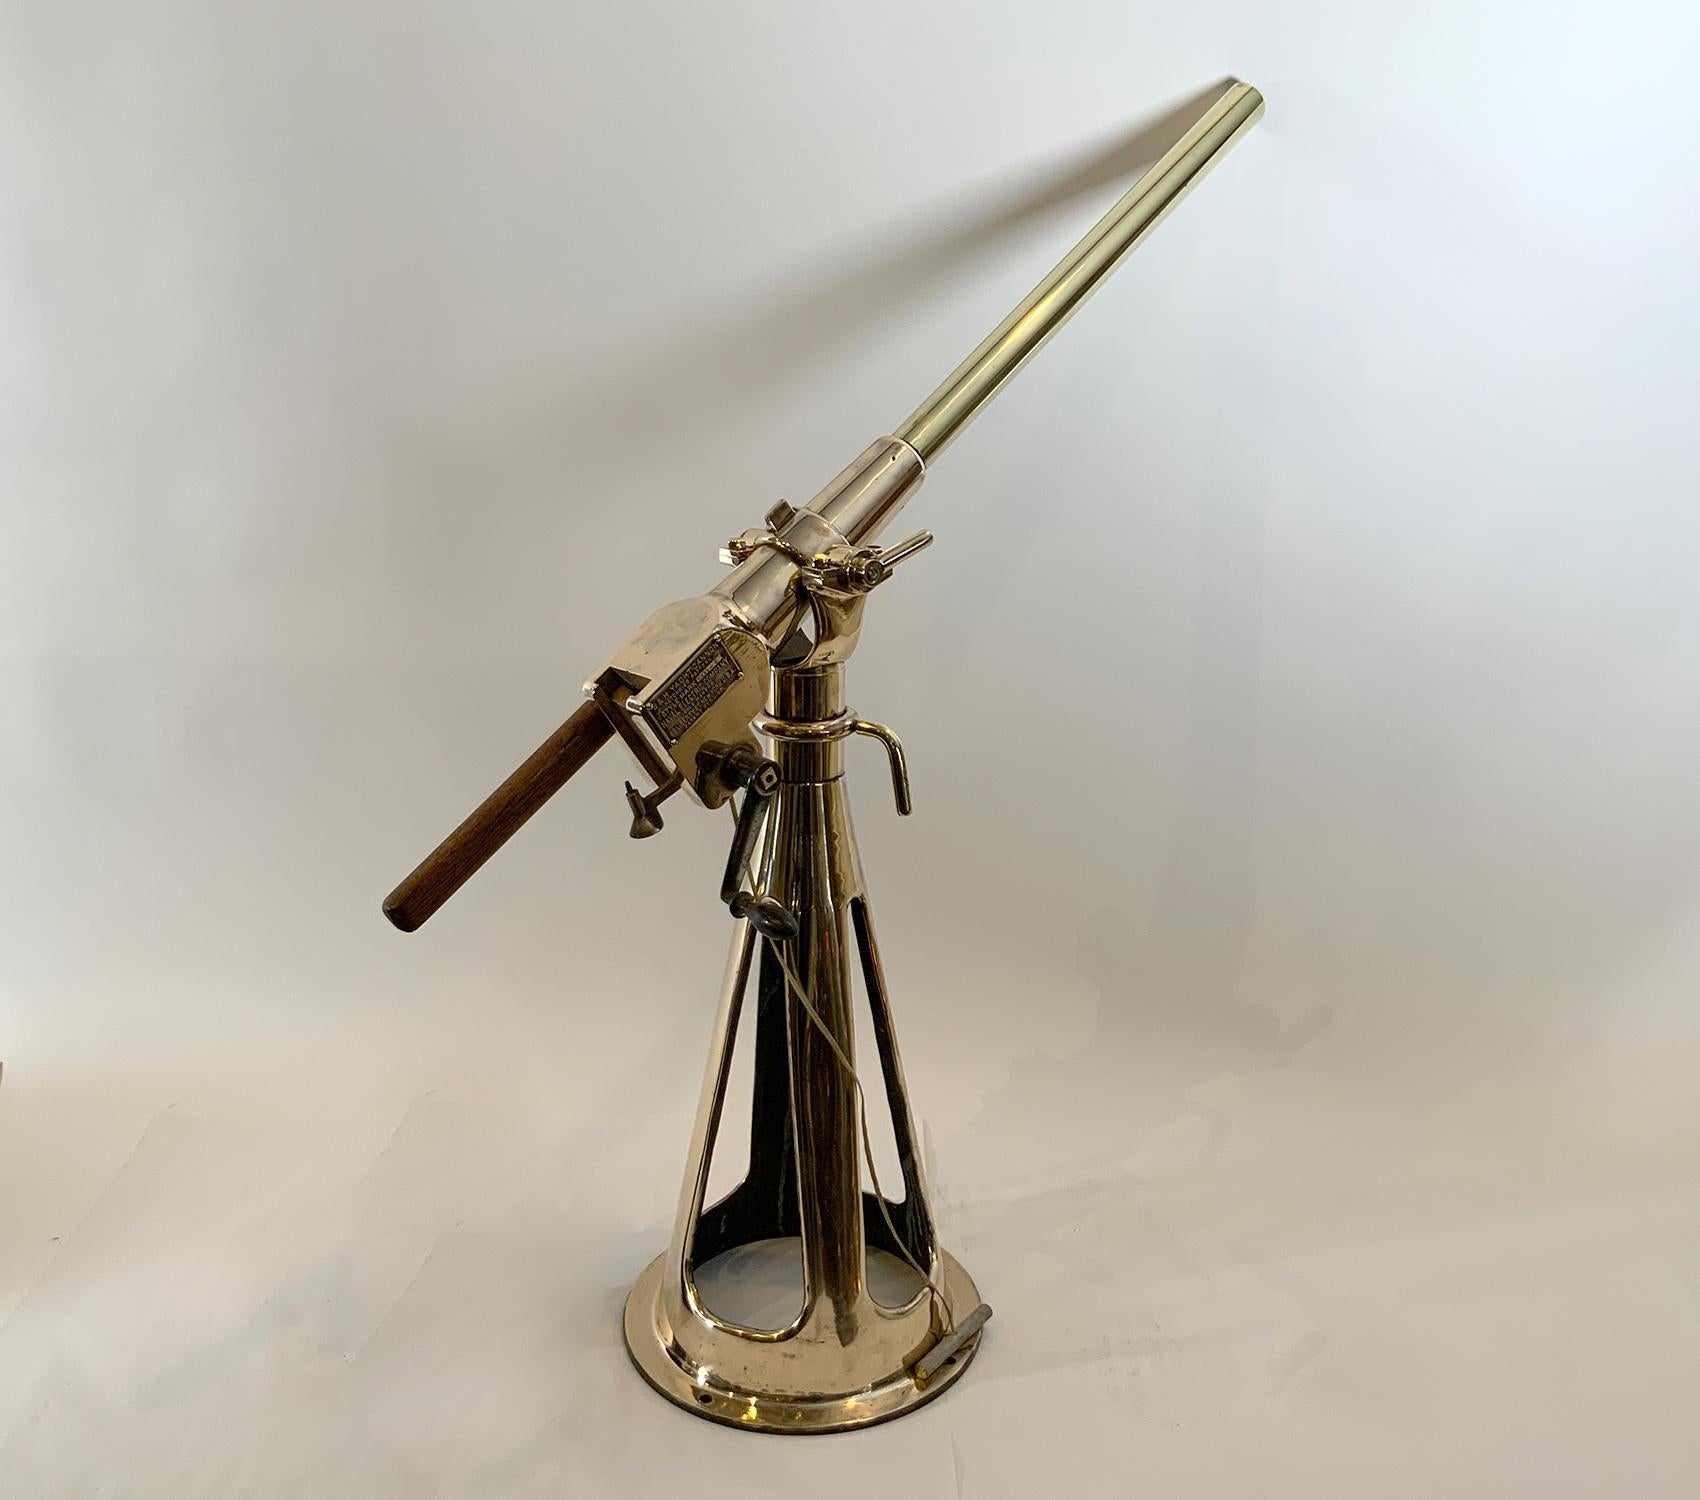 Fabulous early twentieth century signal cannon by an American maker.

With brass makers plate that reads:

B & H YACHT CANNON
HOTCHKISS PATTERN
STYLE MARK 1900 - 4
NAVAL ELECTRIC COMPANY
SOLE MAKERS
95 LIBERTY ST. NEW YORK U.S.A
PATENT